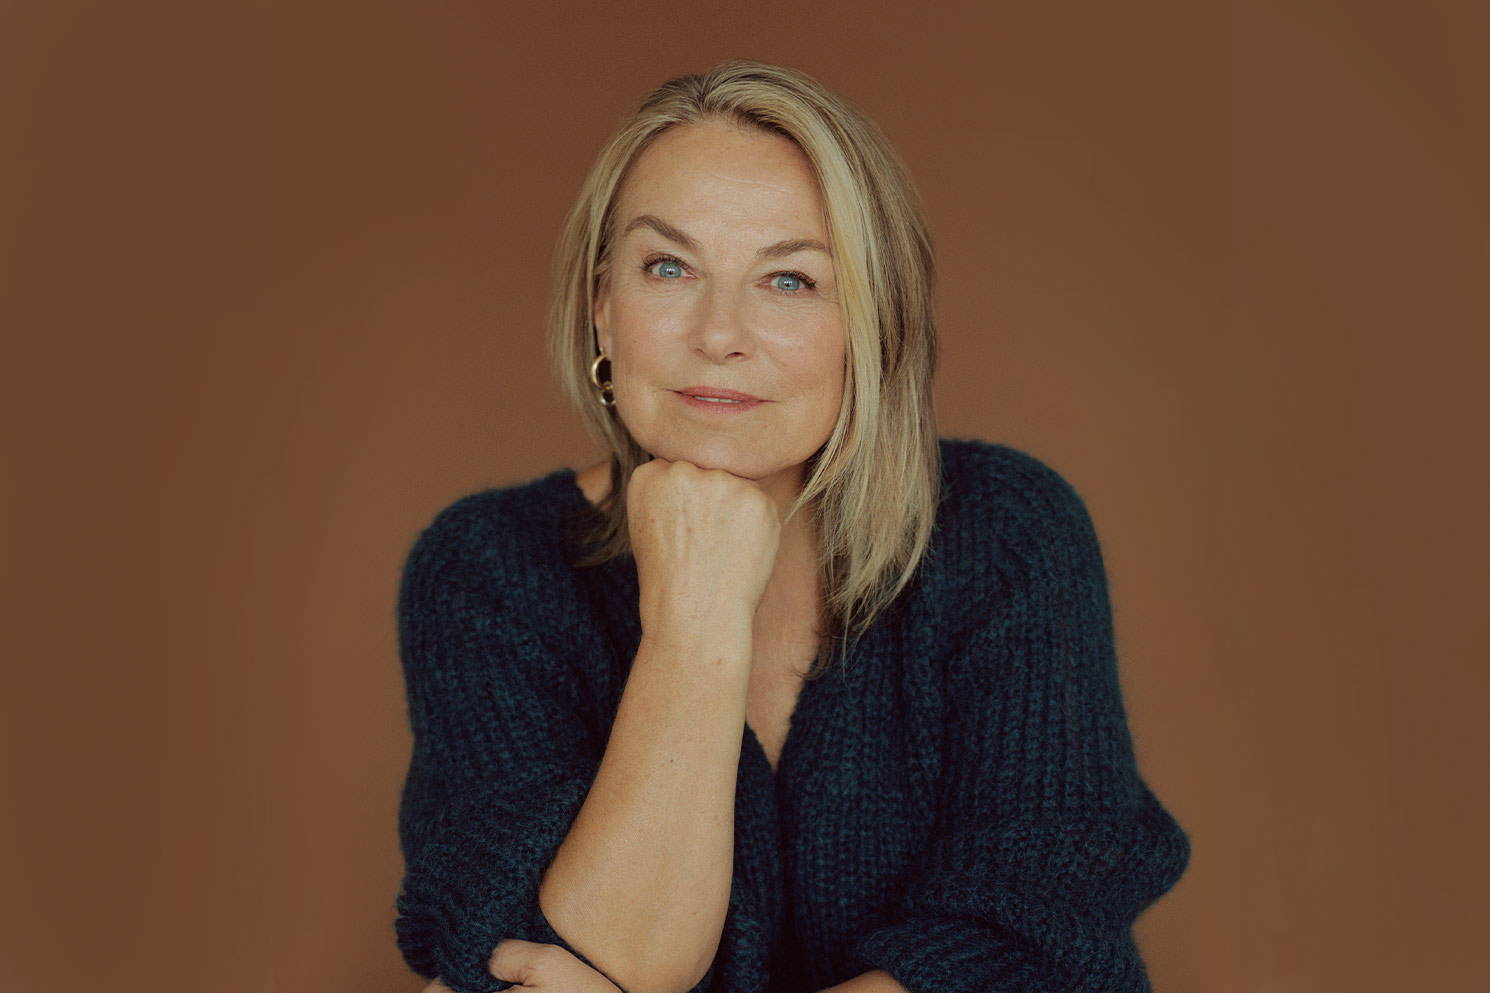 Ester Perel posing for professional photo on brown background with chin resting on fist